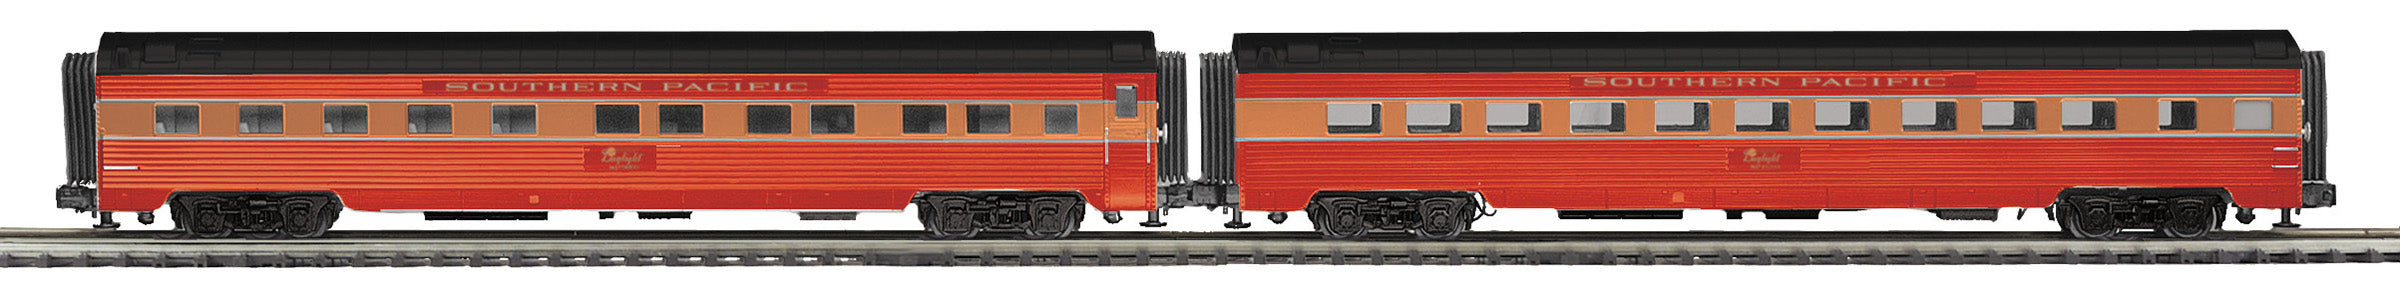 MTH 20-64238 - 70’ Streamlined Slpr/Diner Passenger Set "Southern Pacific" (Daylight) Smooth Sided (2-Car)